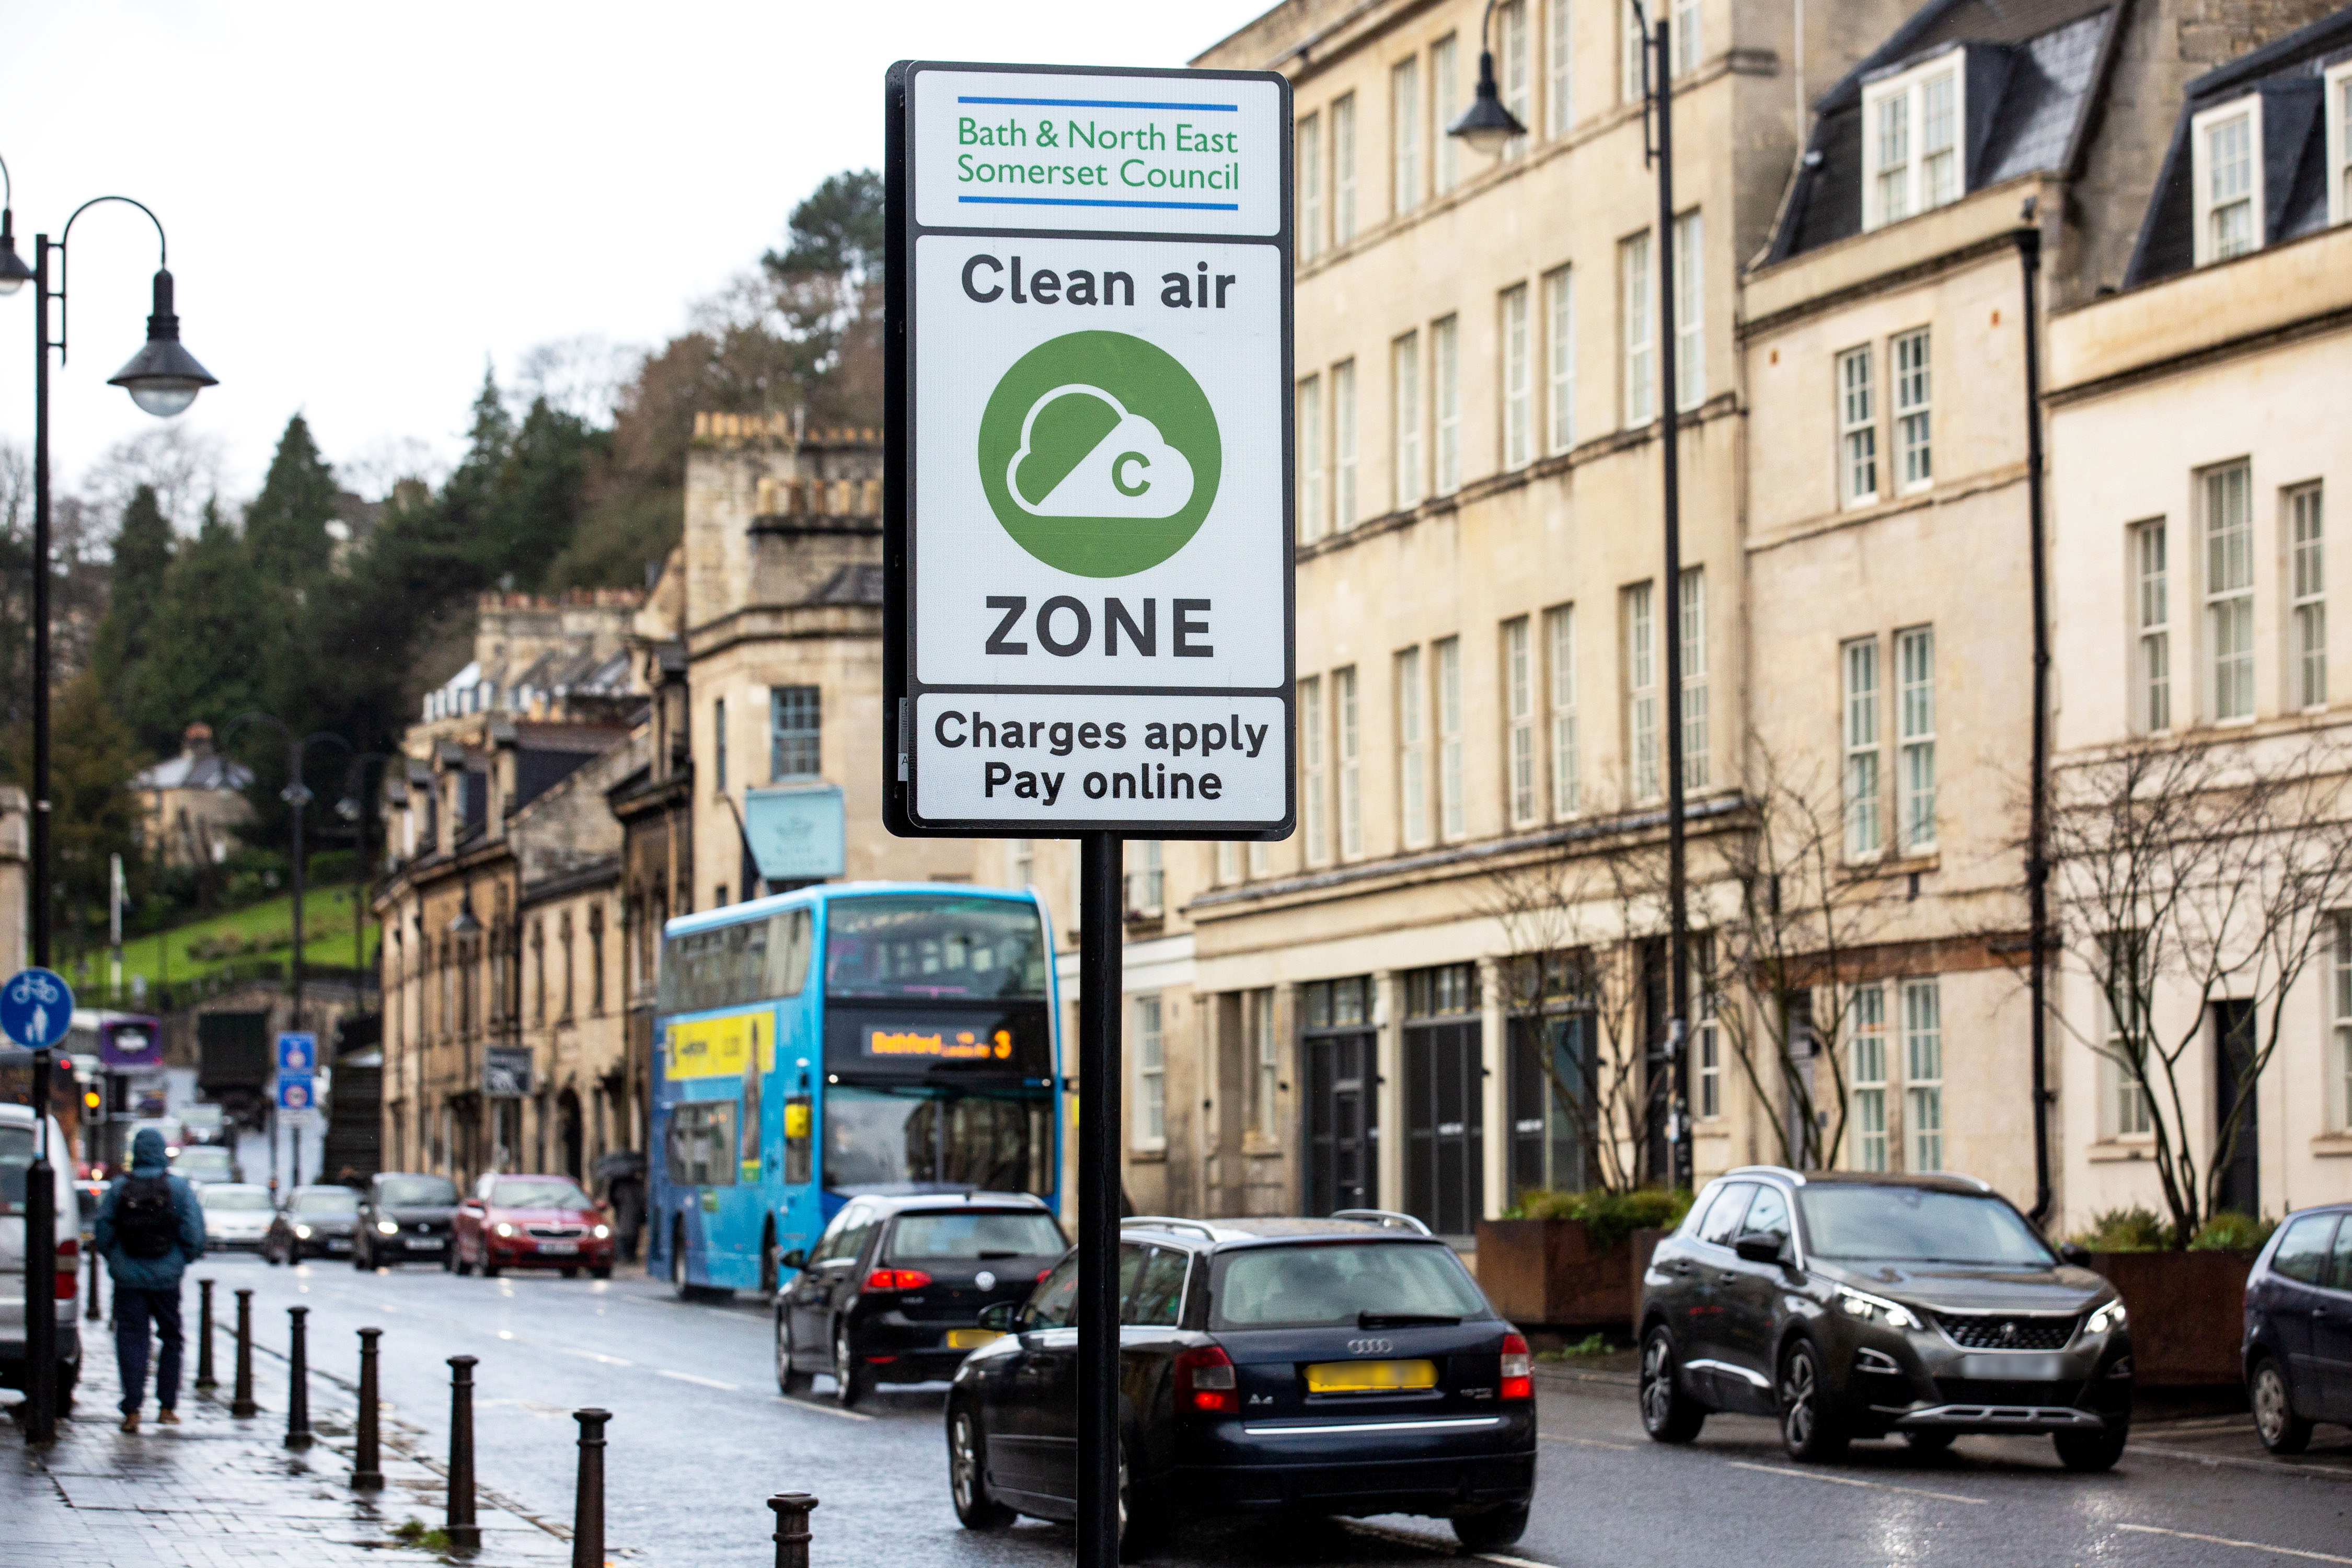 images shows a clean air zone sign  in London Road, Bath with traffic going past it 